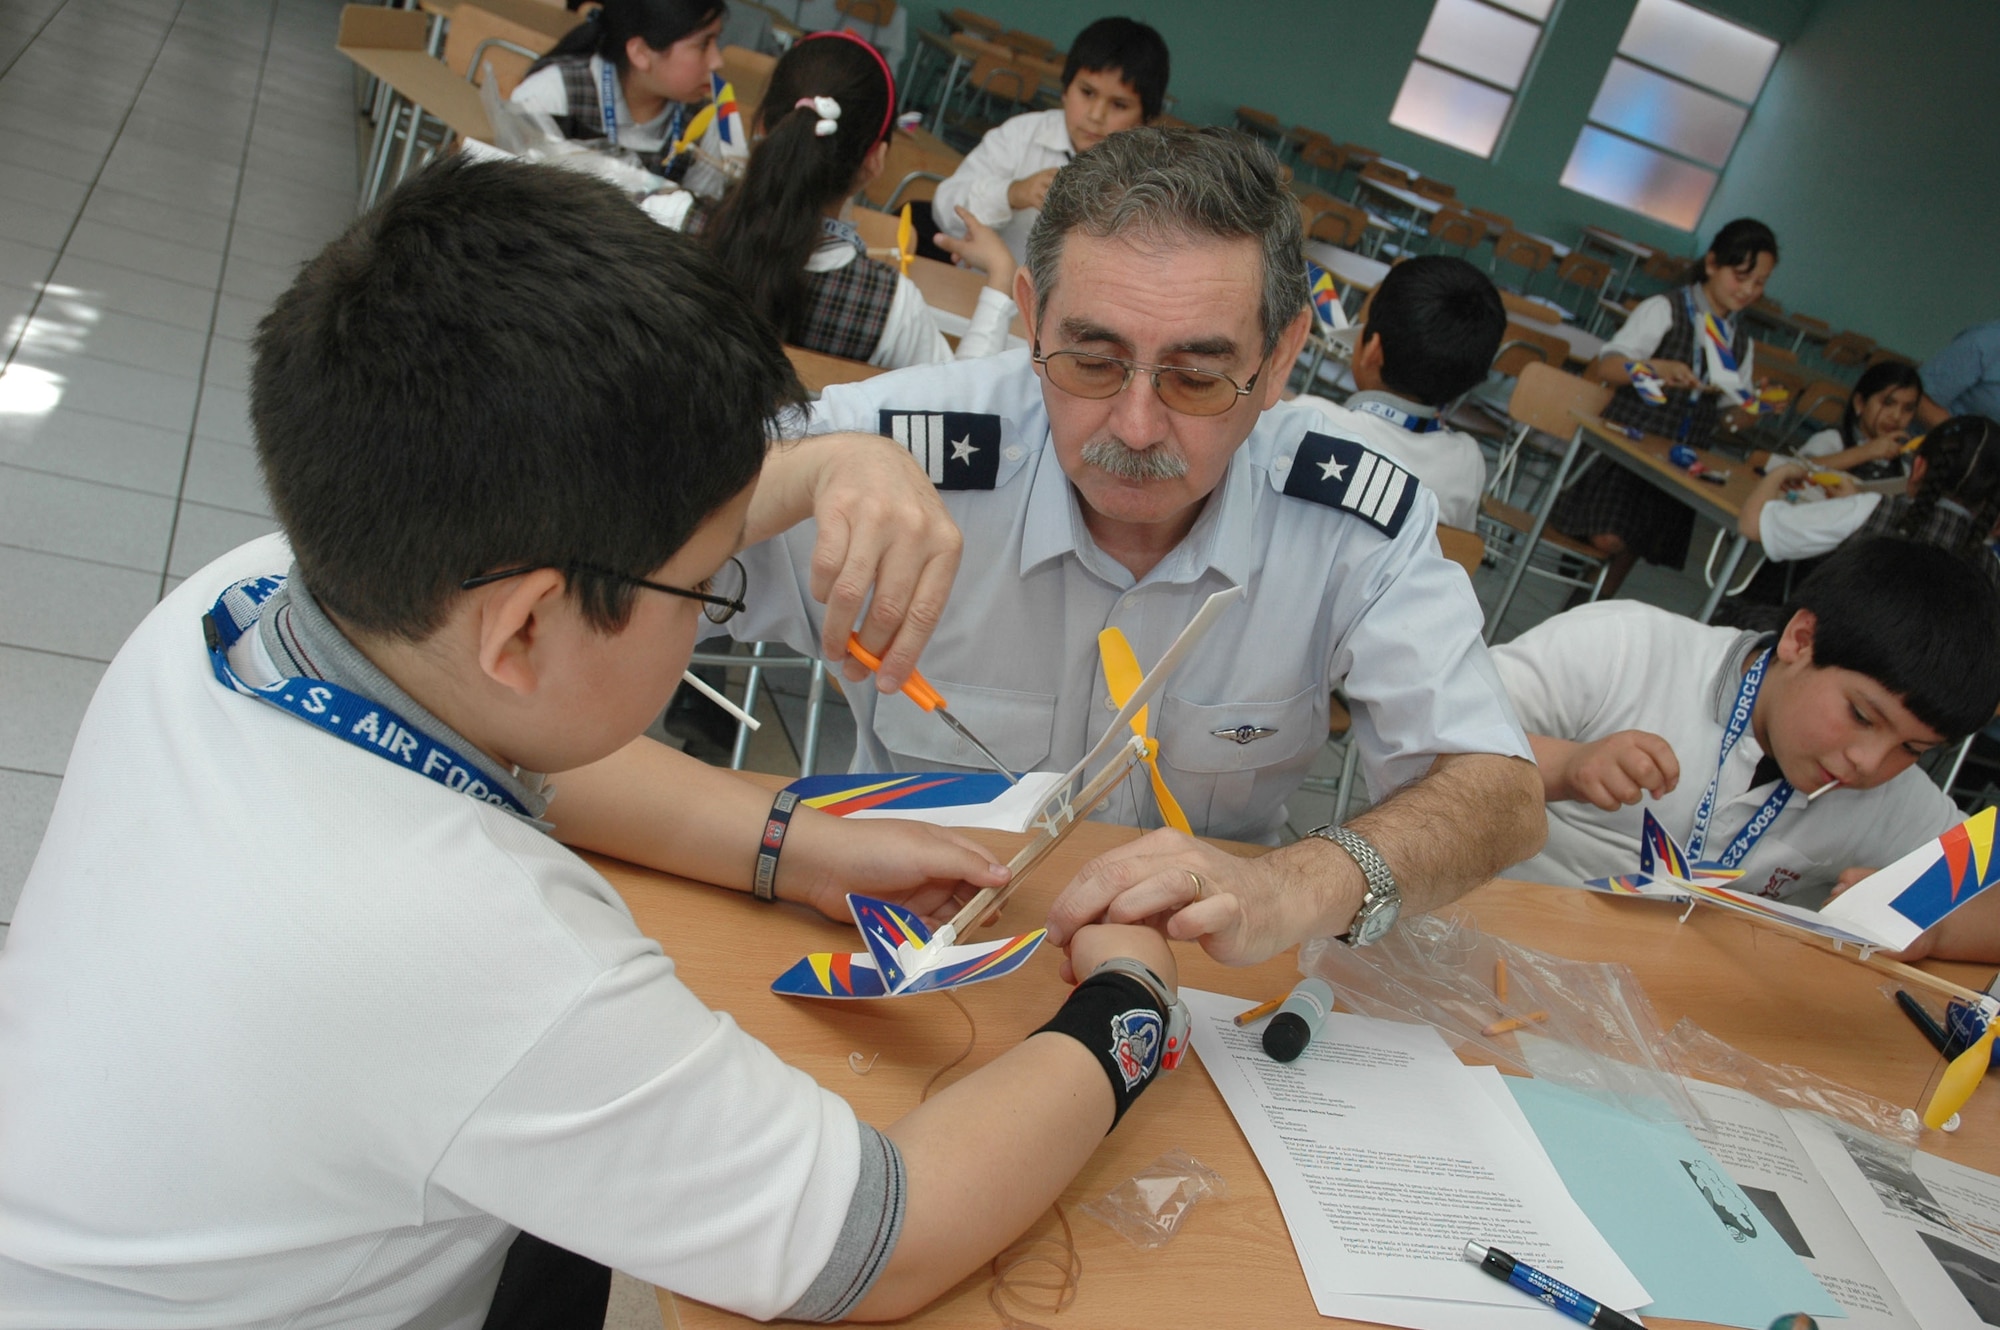 A Chilean air force officer assists a group of students at the Complejo Educacional Esperanza School in Santiago, Chile, during a community outreach event on Oct. 27. The model airplane kits were donated by a Silicon Valley technology company for use with Operation Southern Partner, an Air Forces Southern-led exchange aimed at providing intensive, periodic subject matter exchanges with partner nations in the U.S. Southern Command area of focus.  Included in the exchange is visits like this one where Airmen partnered with local U.S. Embassy volunteers, Chilean air force officers, members of the U.S. Military Group and volunteers from Agilent Technologies to teach children about the practical applications of the sciences.  (U.S. Embassy photo/Jose Nuños)